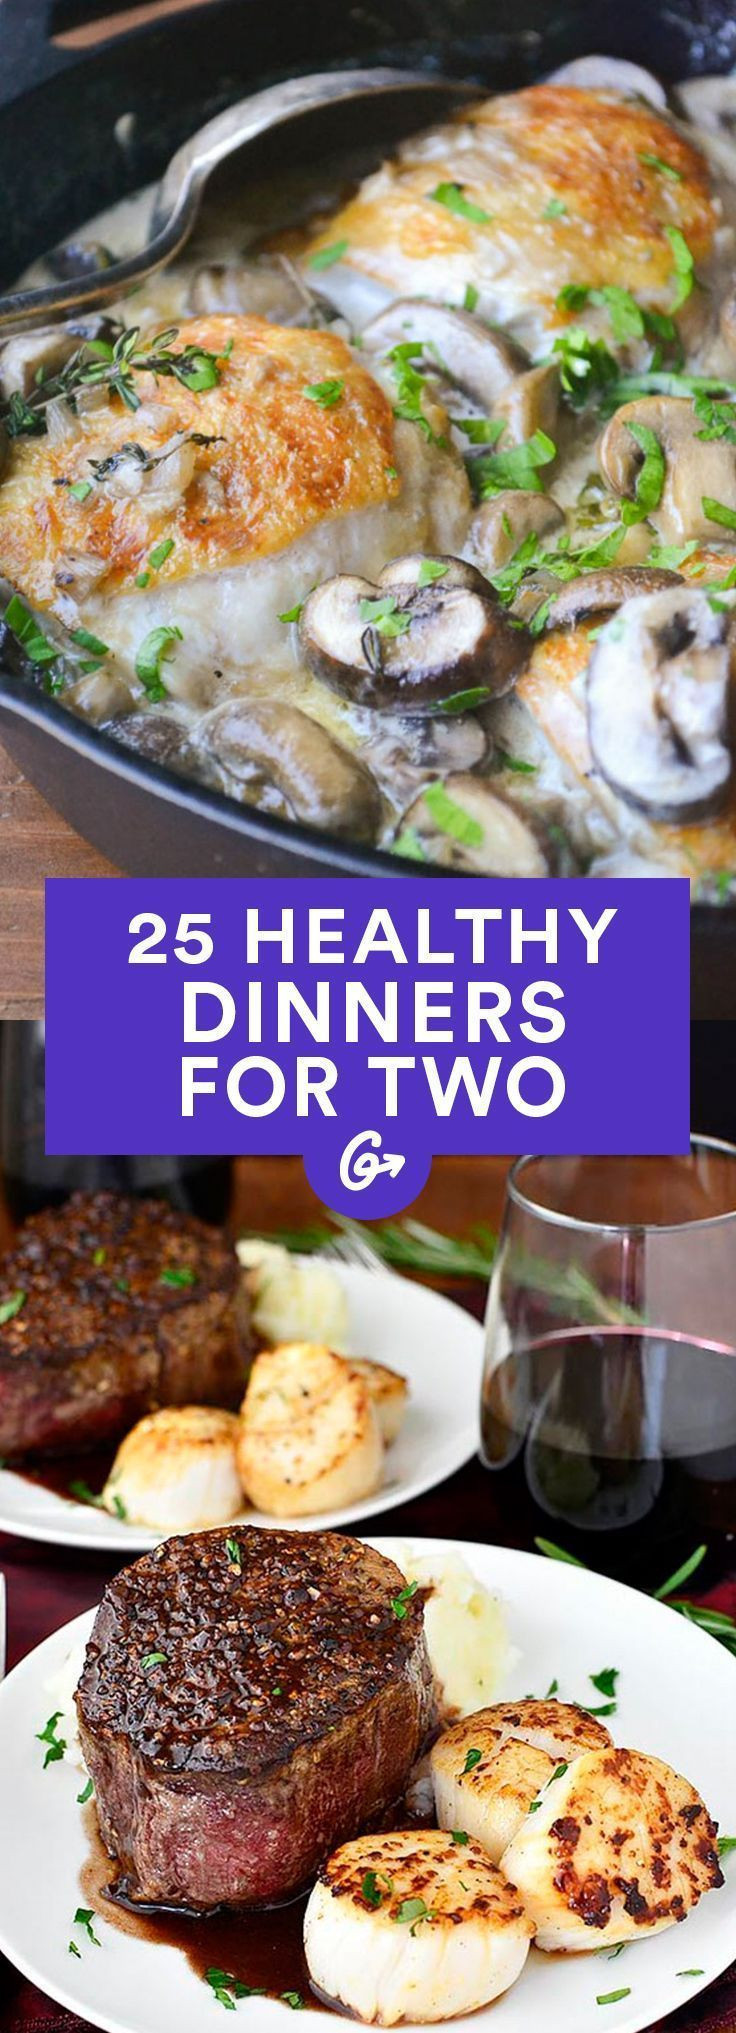 Healthy Dinners for Two On A Budget Awesome 21 Best Ideas Dinners for Two A Bud Best Round Up